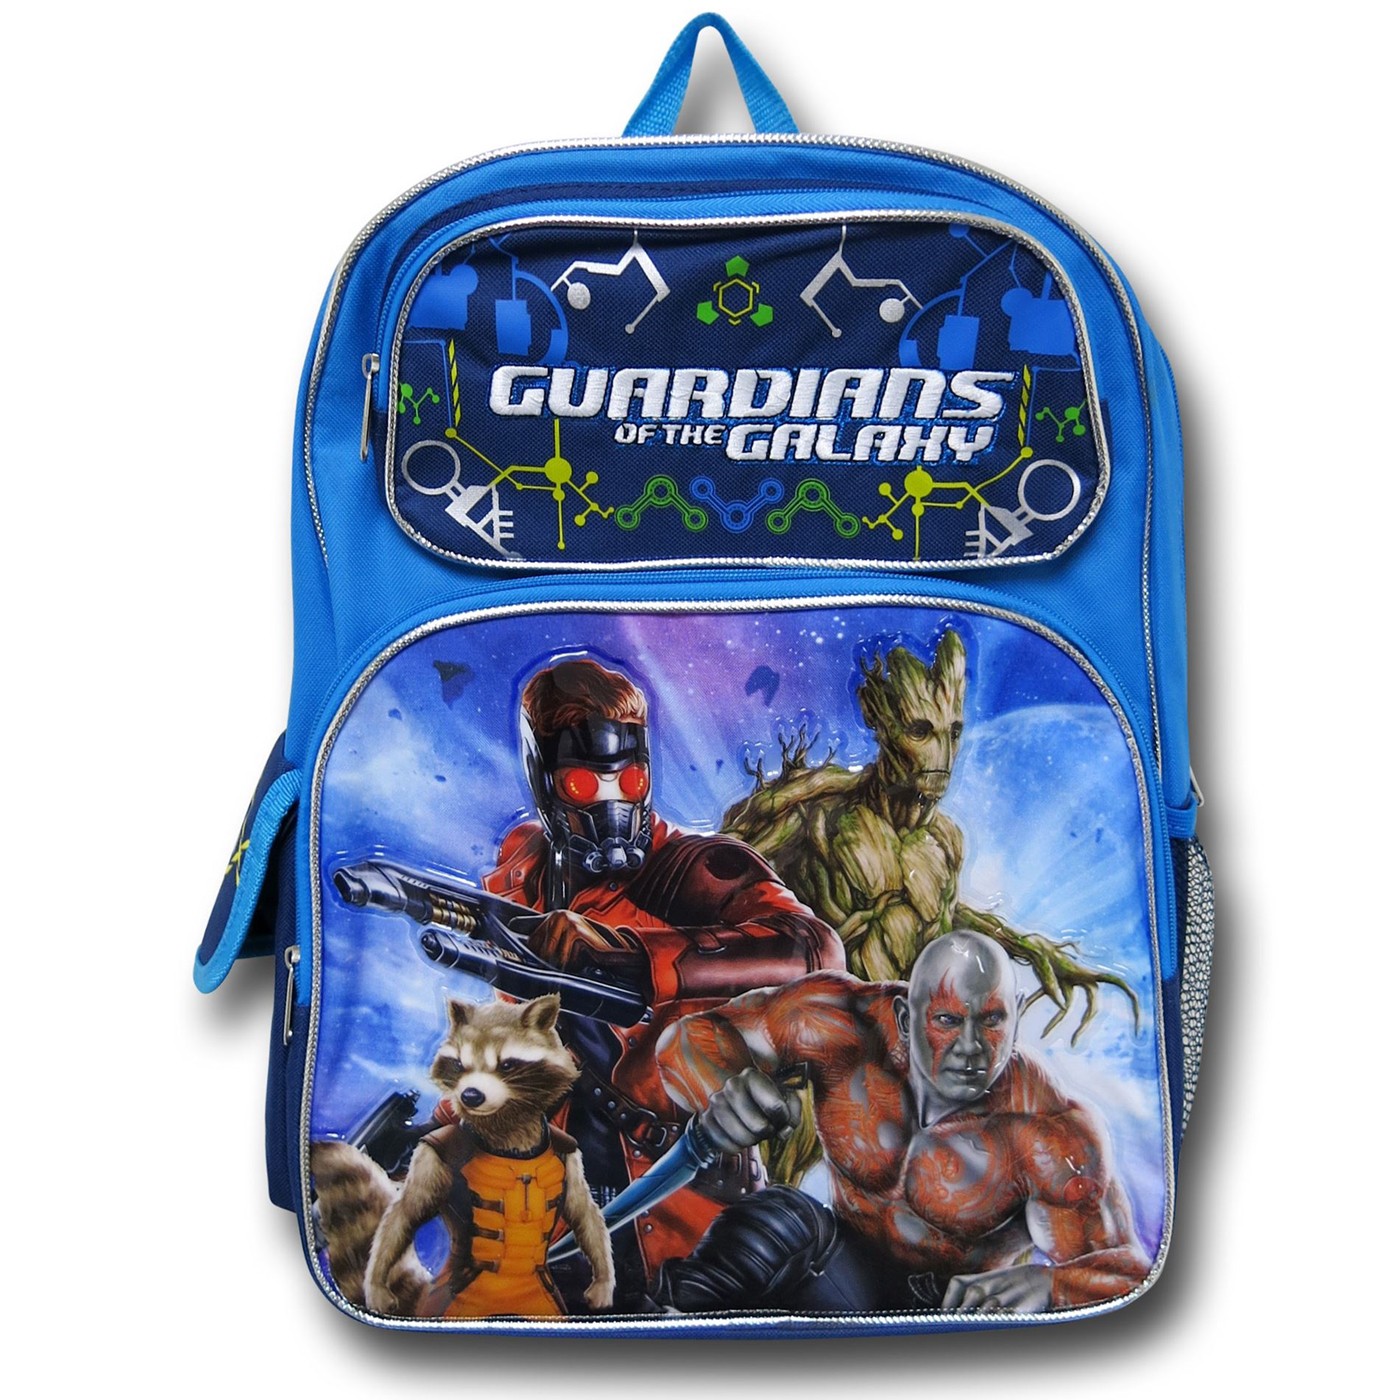 Guardians of the Galaxy Movie Kid's Backpack